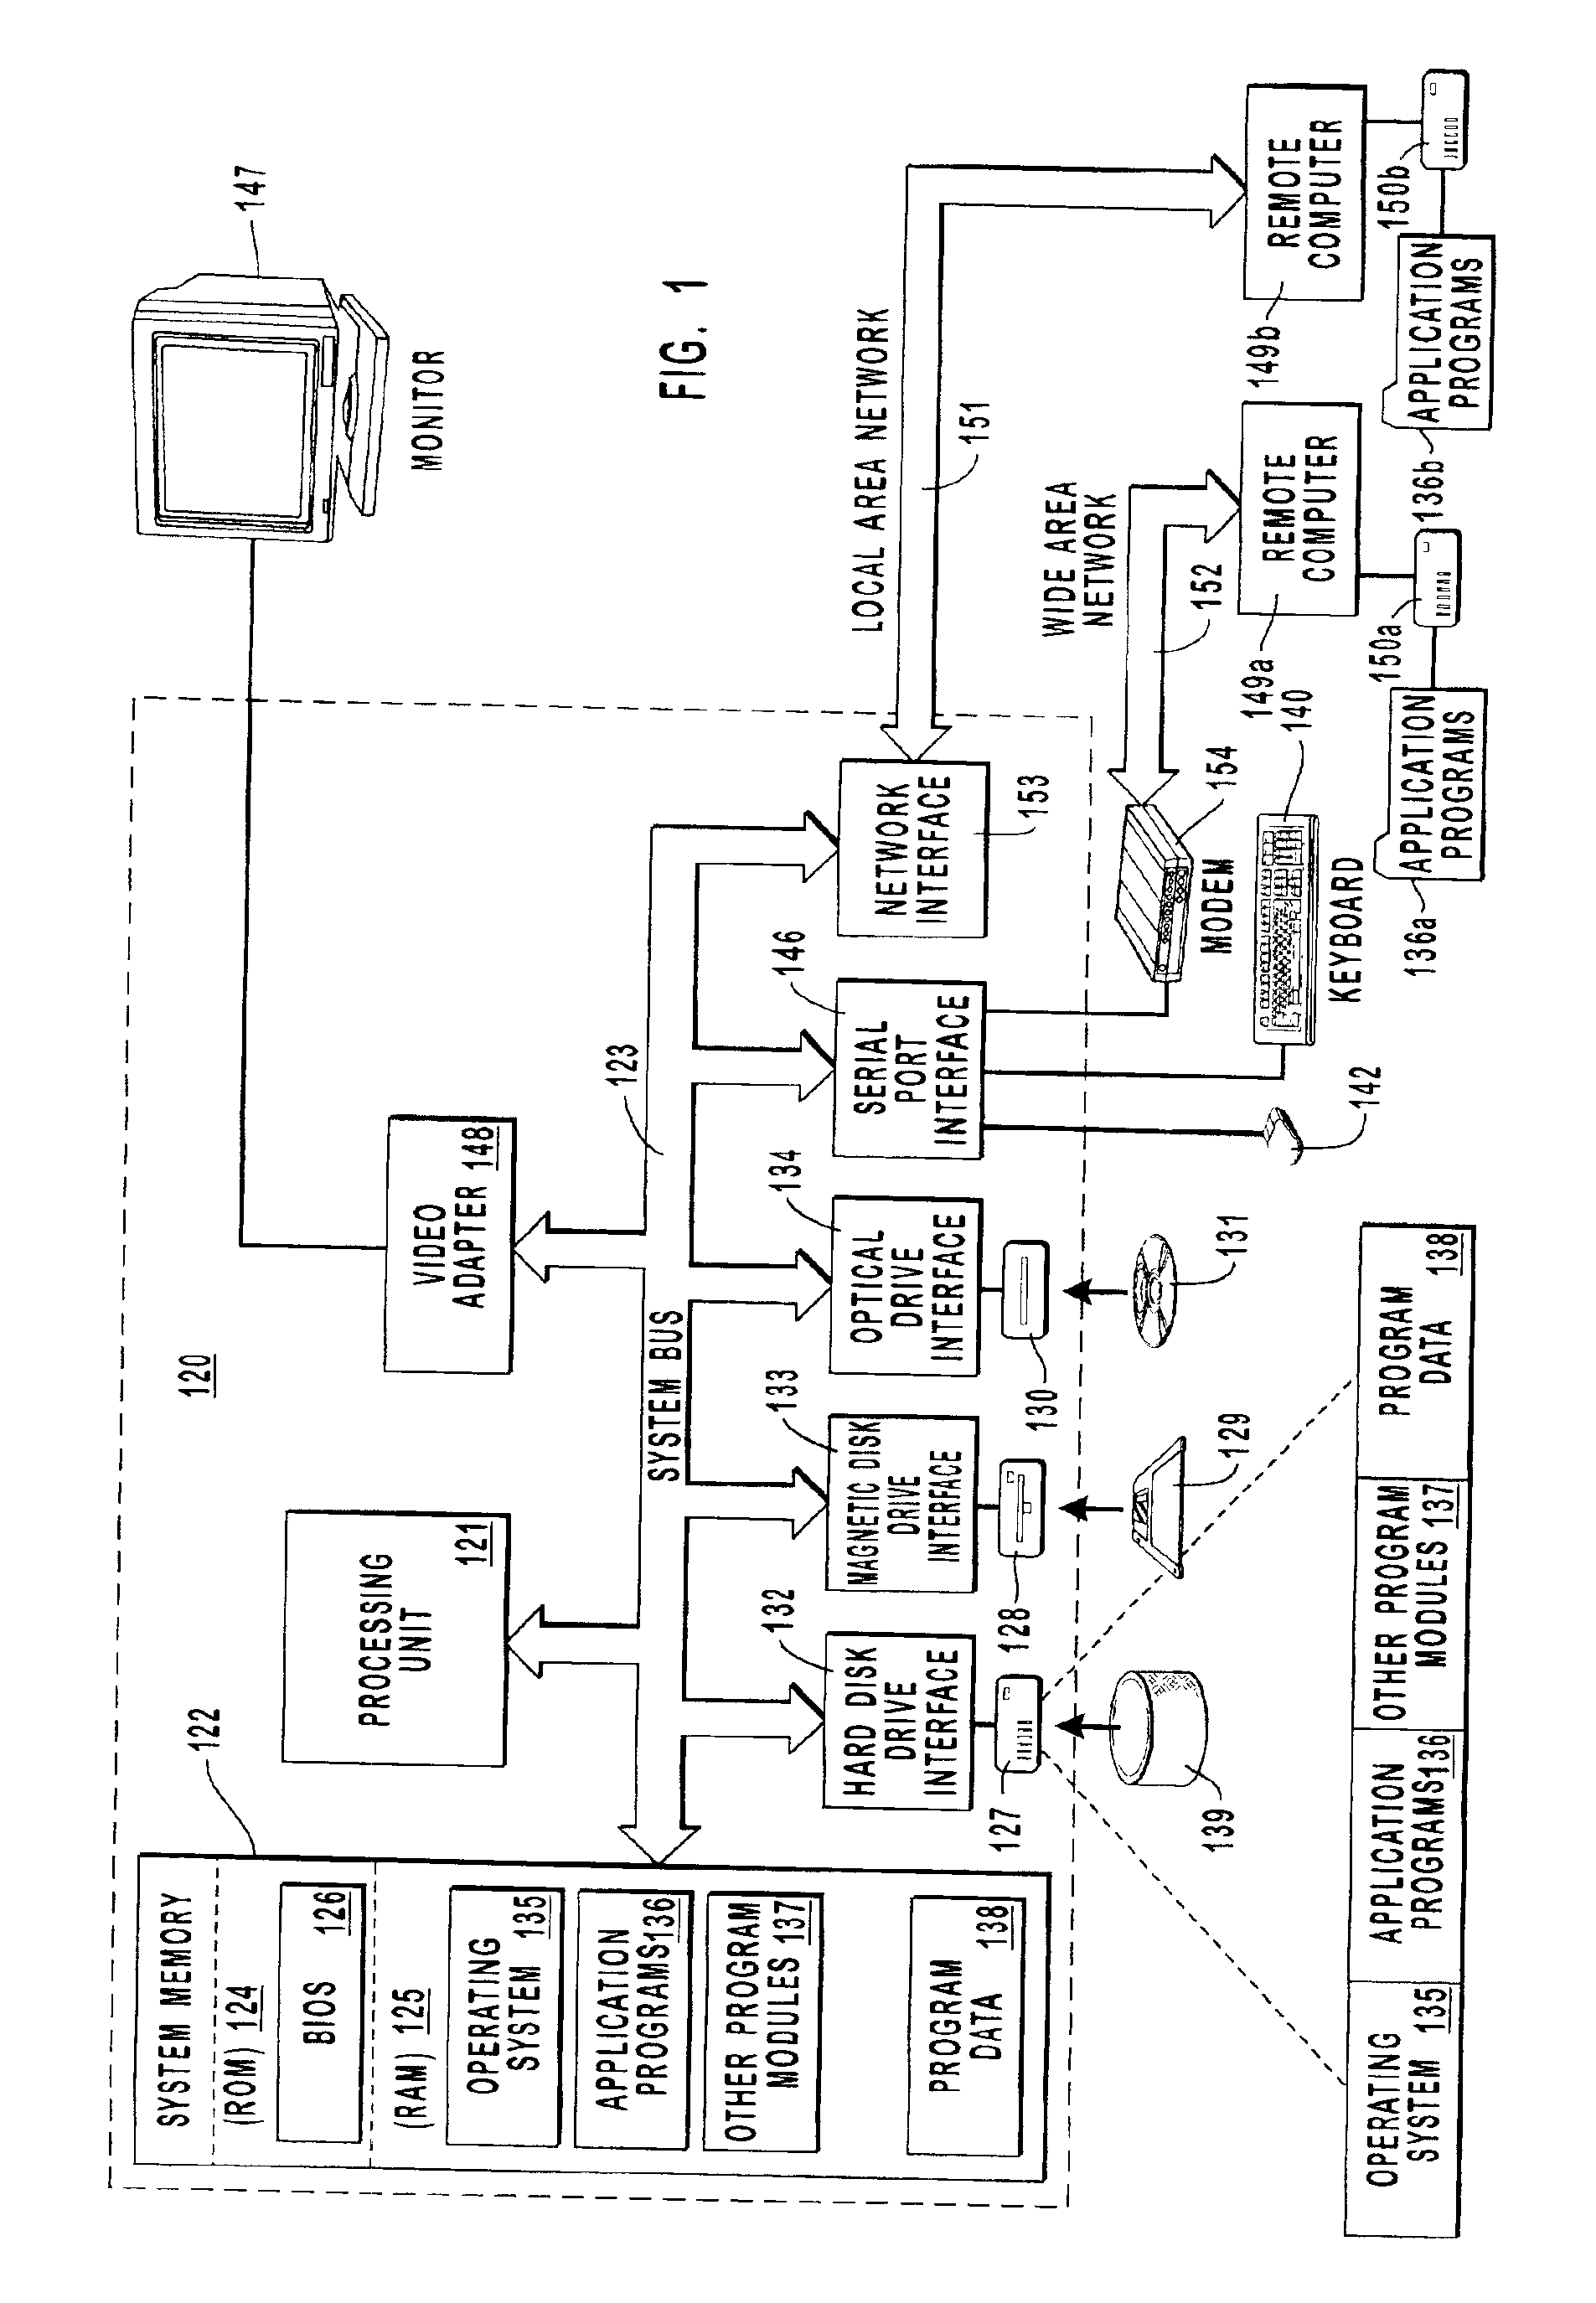 Methods and systems for generating a viewable document using view descriptors and generic view stylesheets